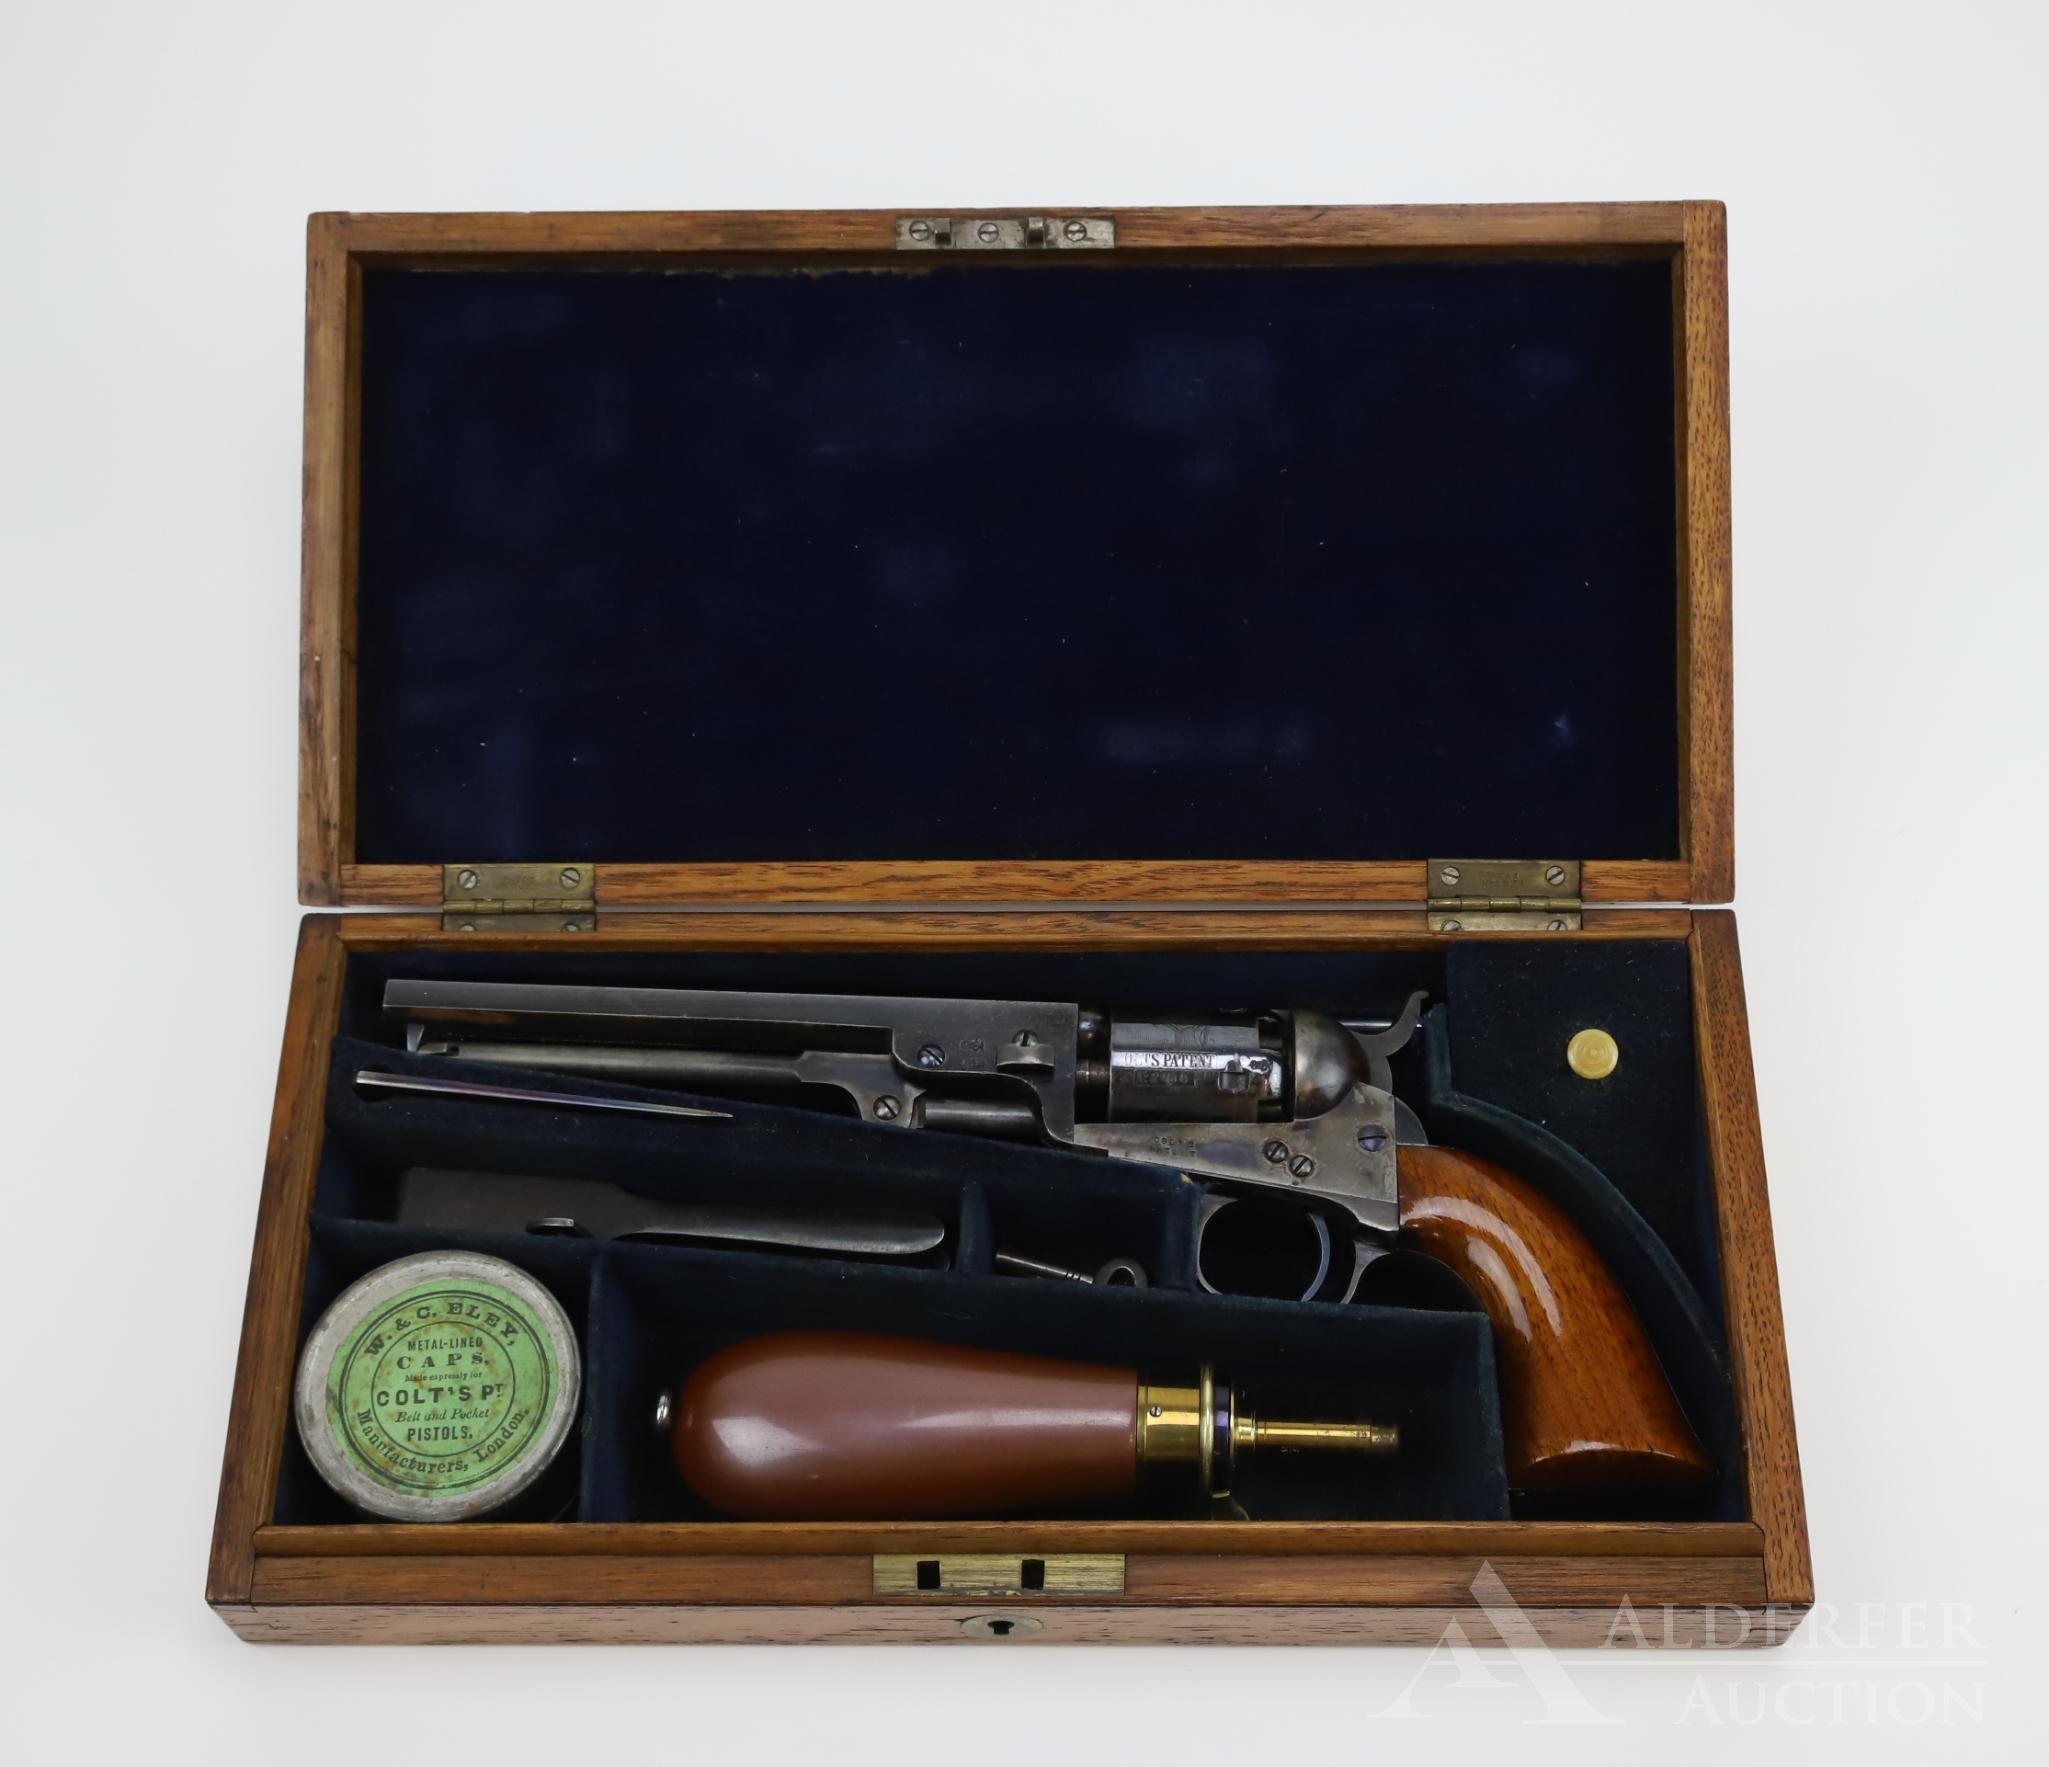 Cased Colt (London) Model 1849 Pocket Revolver with Accoutrements